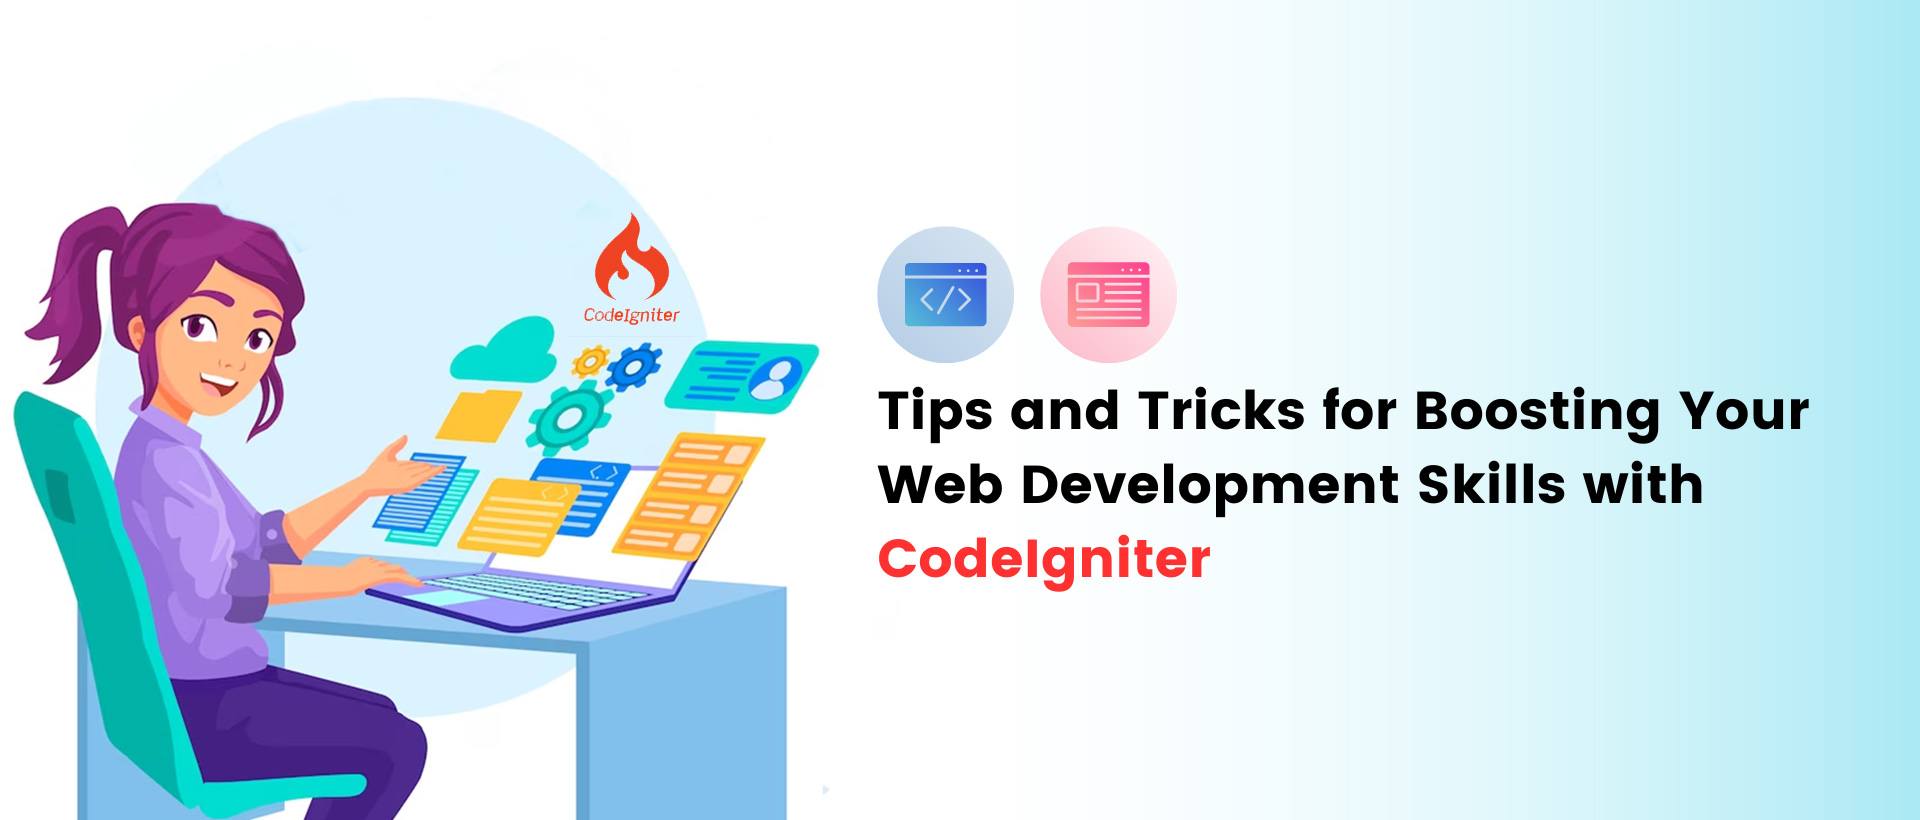 Tips and Tricks for Boosting Your Web Development Skills with CodeIgniter